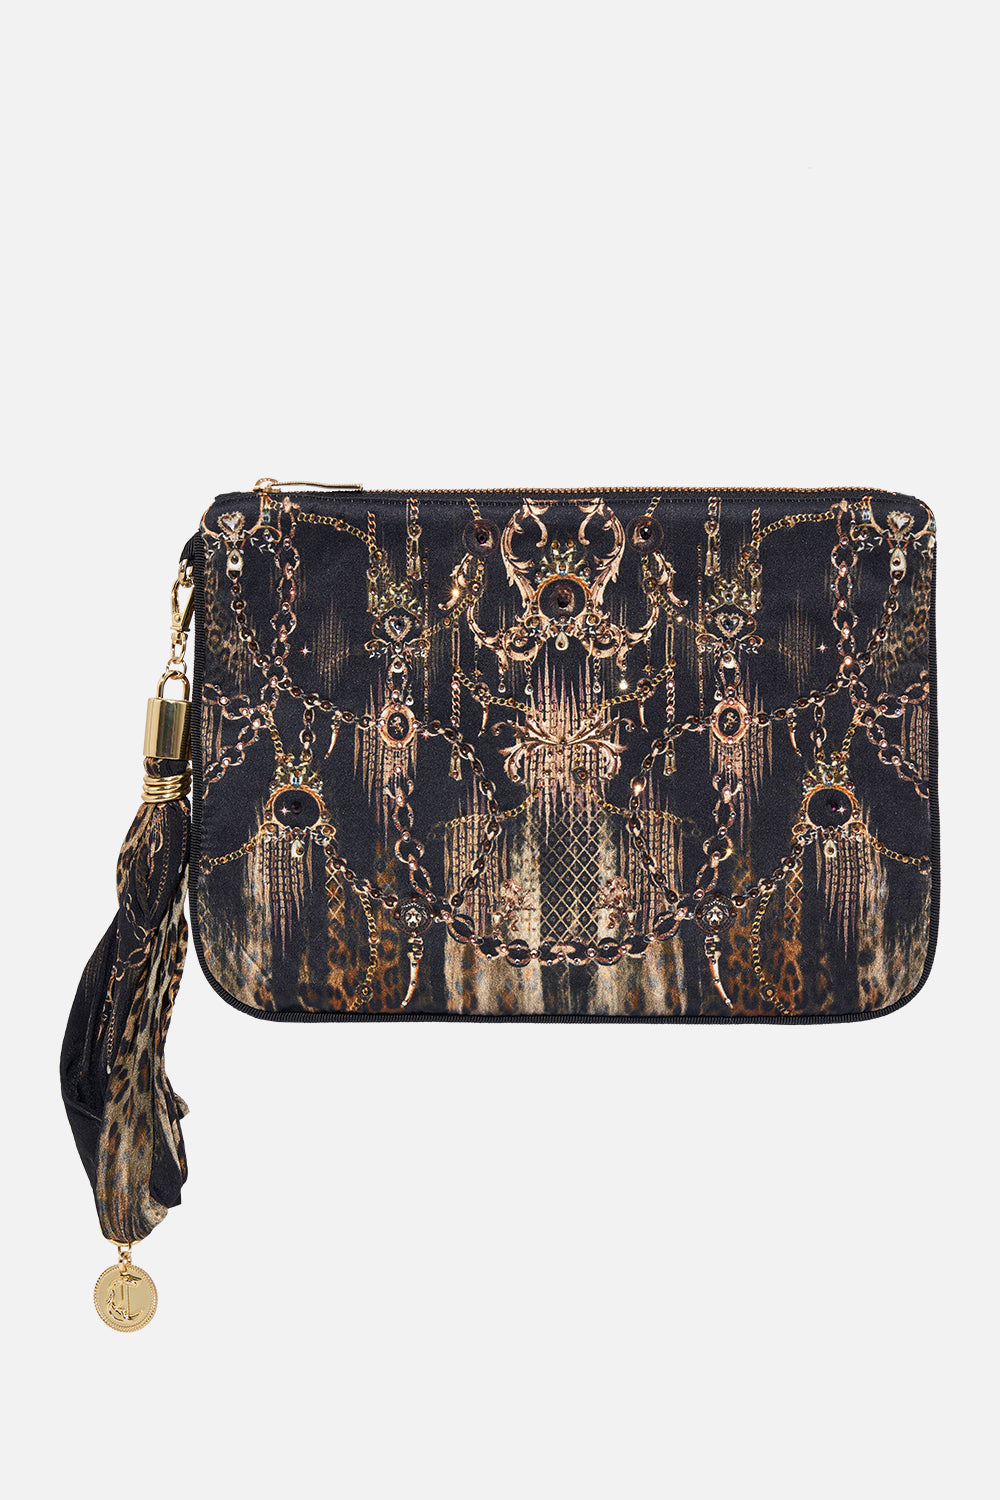 Product view of CAMILLA animal print silk clutch bag in Jungle Dreaming print